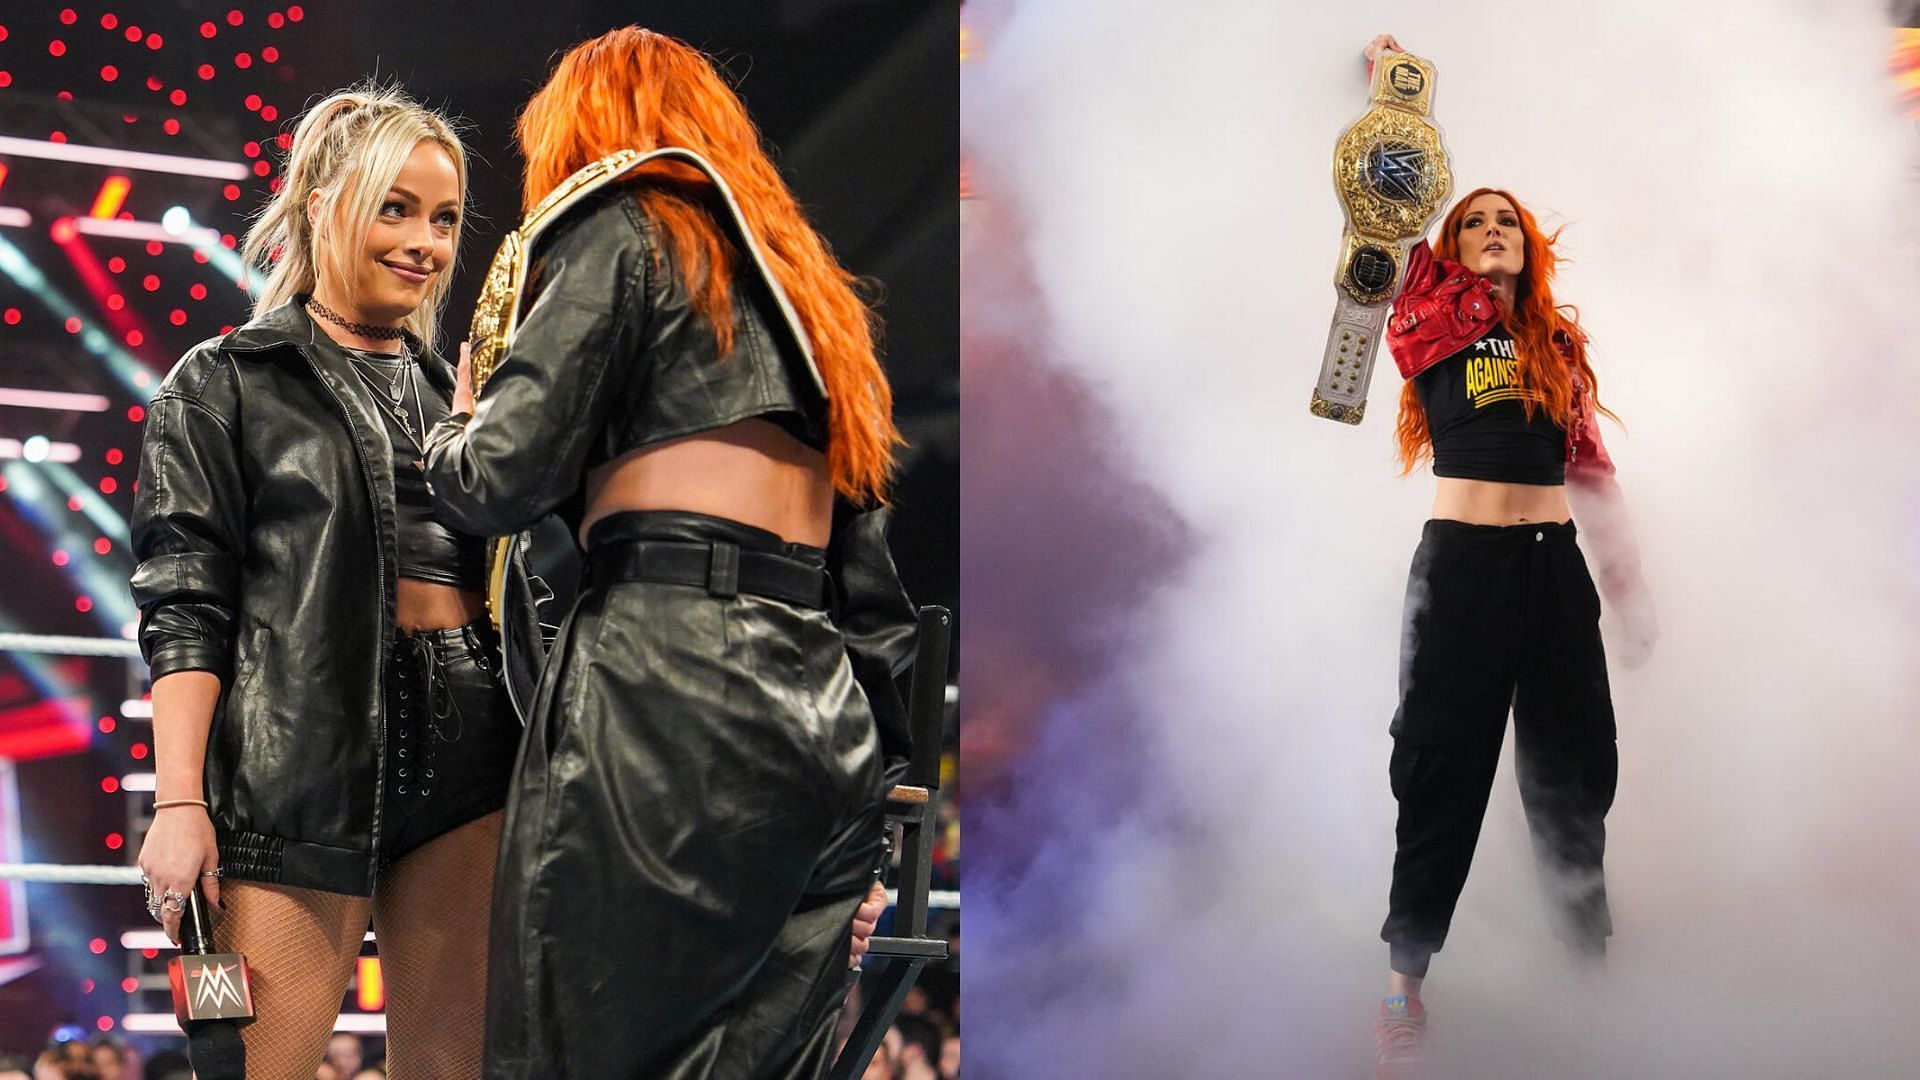 Liv Morgan will challenge Becky Lynch at the King and Queen of the Ring PLE